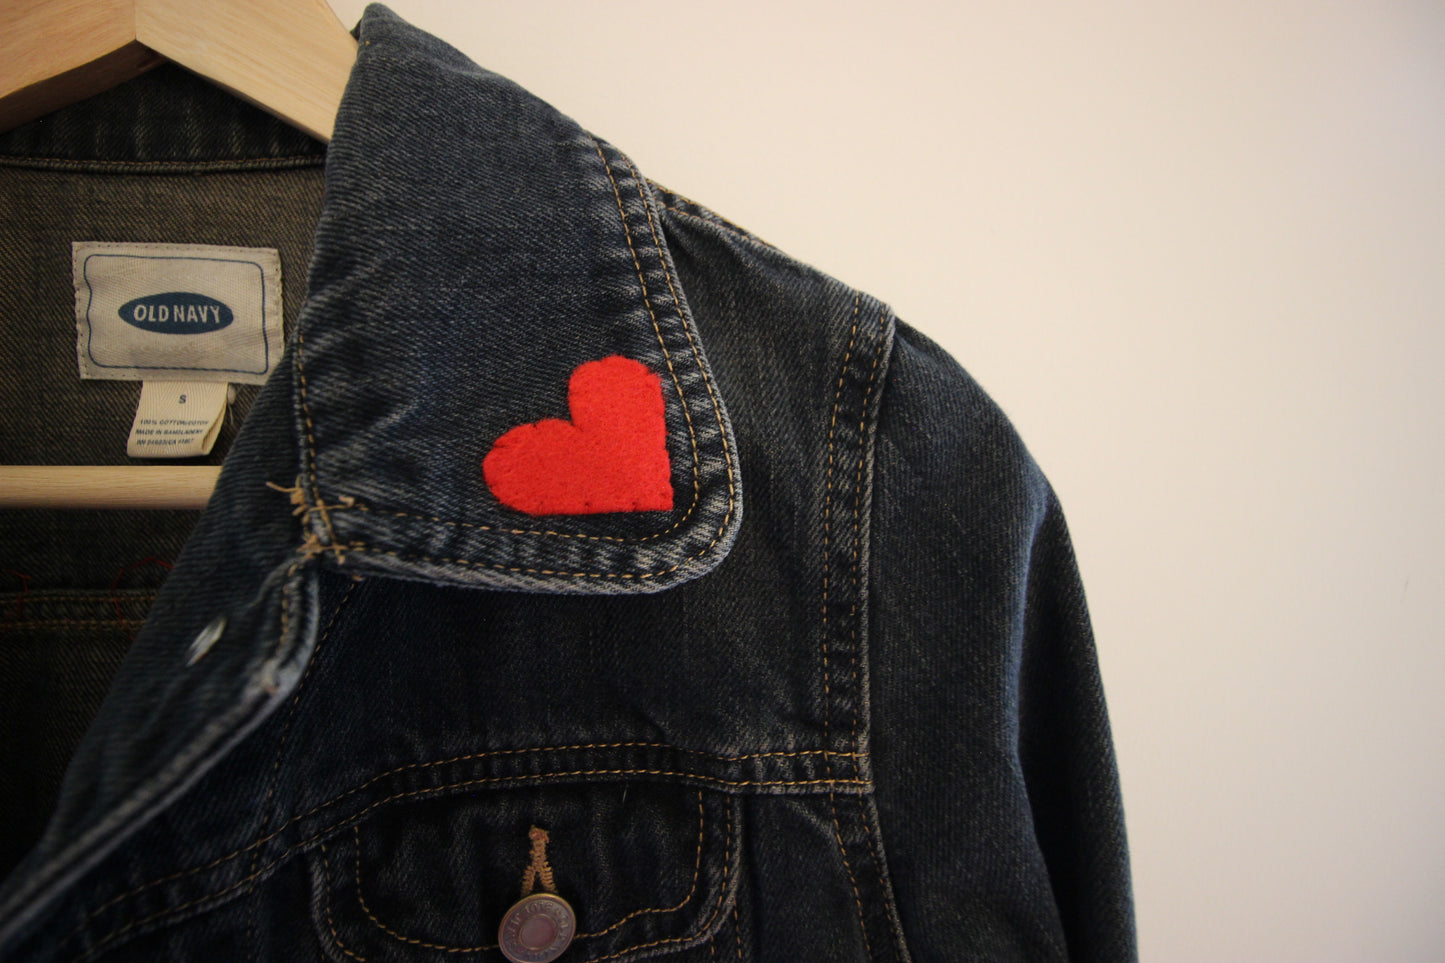 jean jacket with hearts